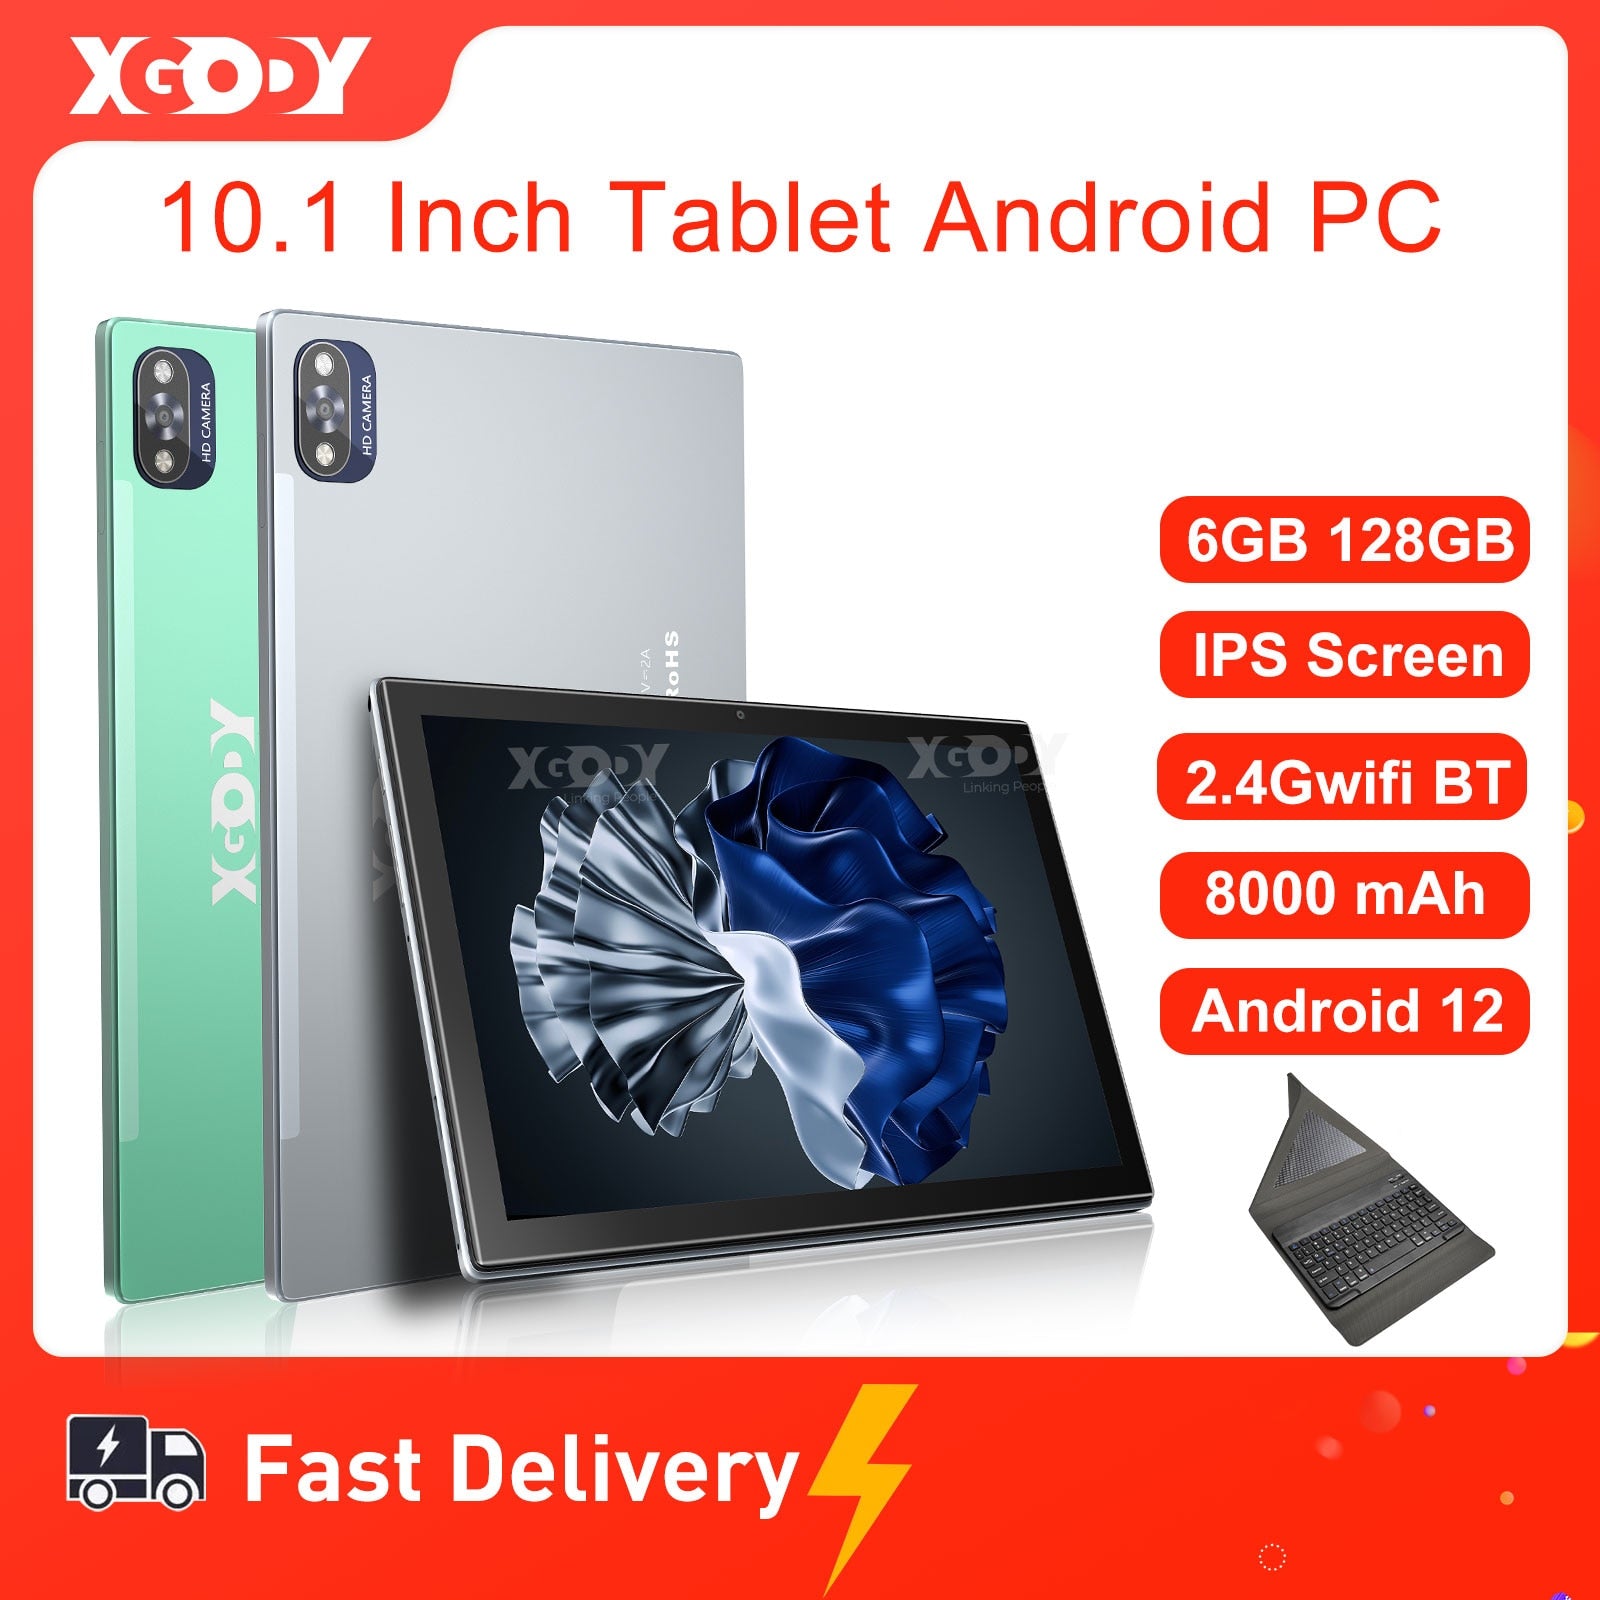 XGODY 10.1 Inch Tablet Android 12 6GB 128GB PC IPS Screen Ultra-thin 2.4GWiFi Bluetooth OTG Type-C 8000mAh Tablets With Keyboard